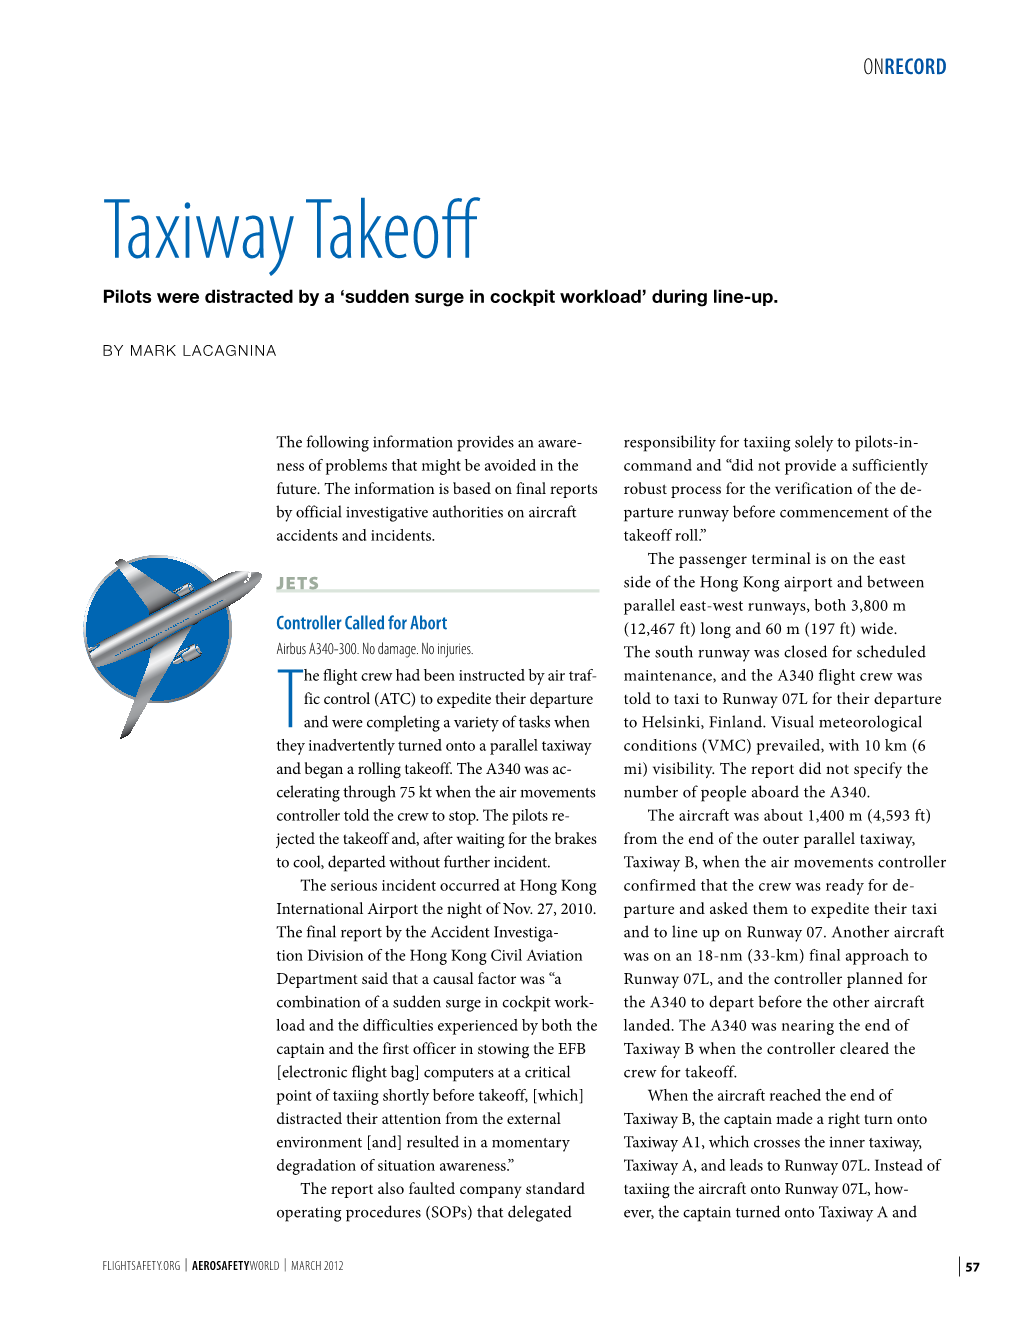 Taxiway Takeoff Pilots Were Distracted by a ‘Sudden Surge in Cockpit Workload’ During Line-Up